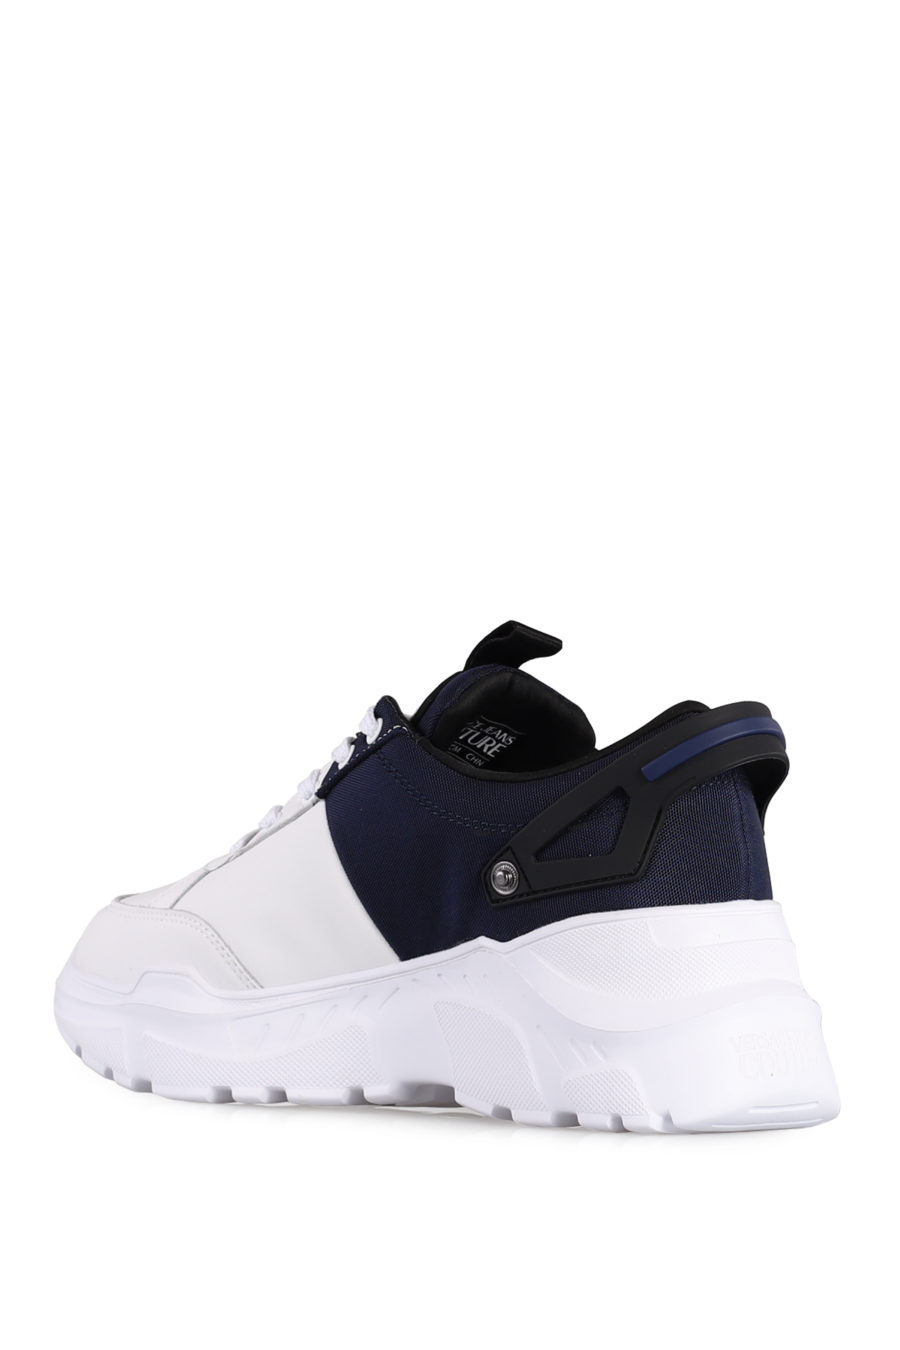 Shoes "Speedtrack" in white and blue - IMG 1045